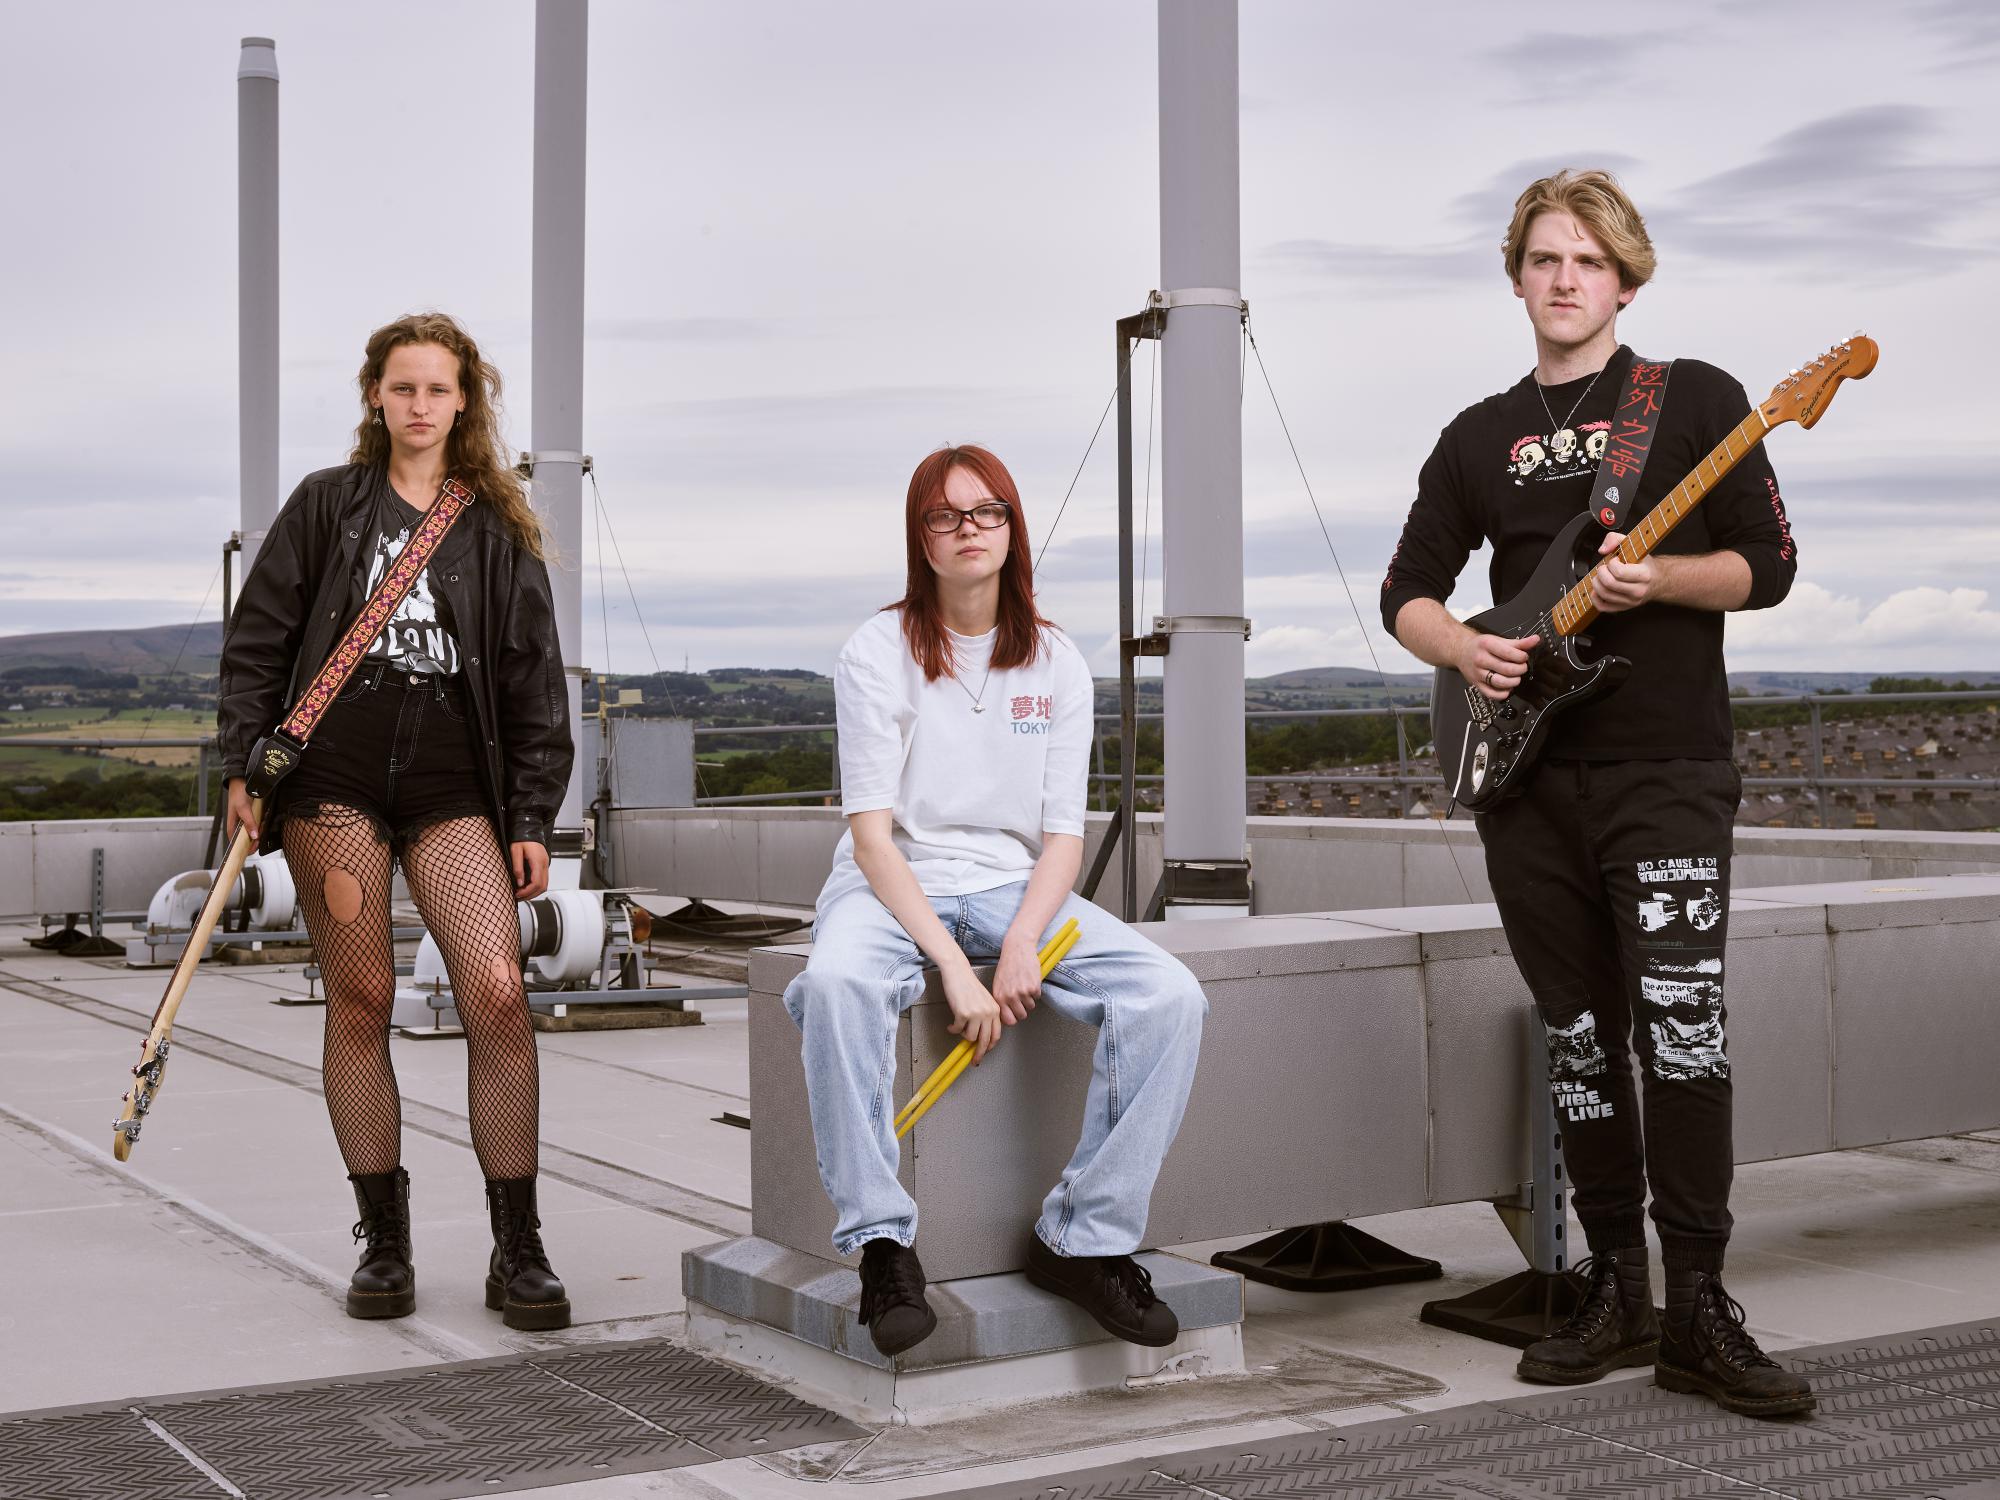 Burnley COllege Sixth Form Centre Band Until Joy prepare to play on the College Campus roof